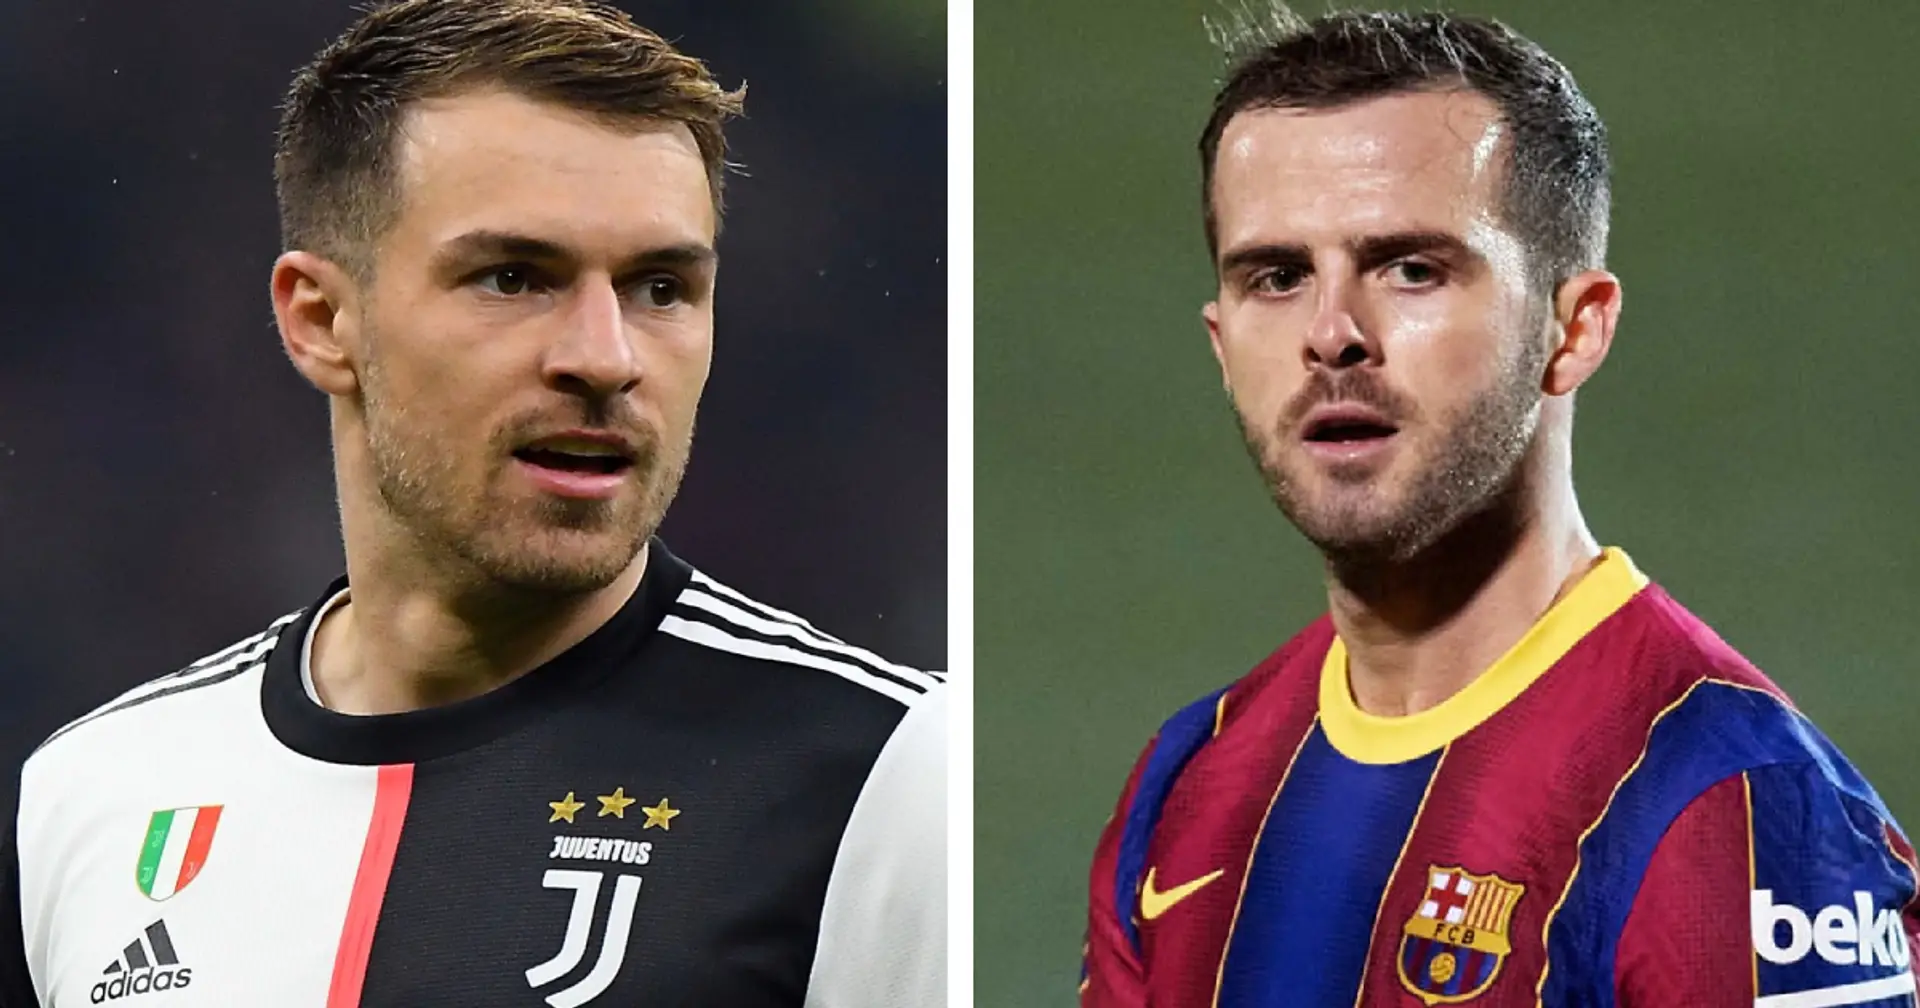 Juventus offer Ramsey in swap deal for Pjanic (reliability: 4 stars)